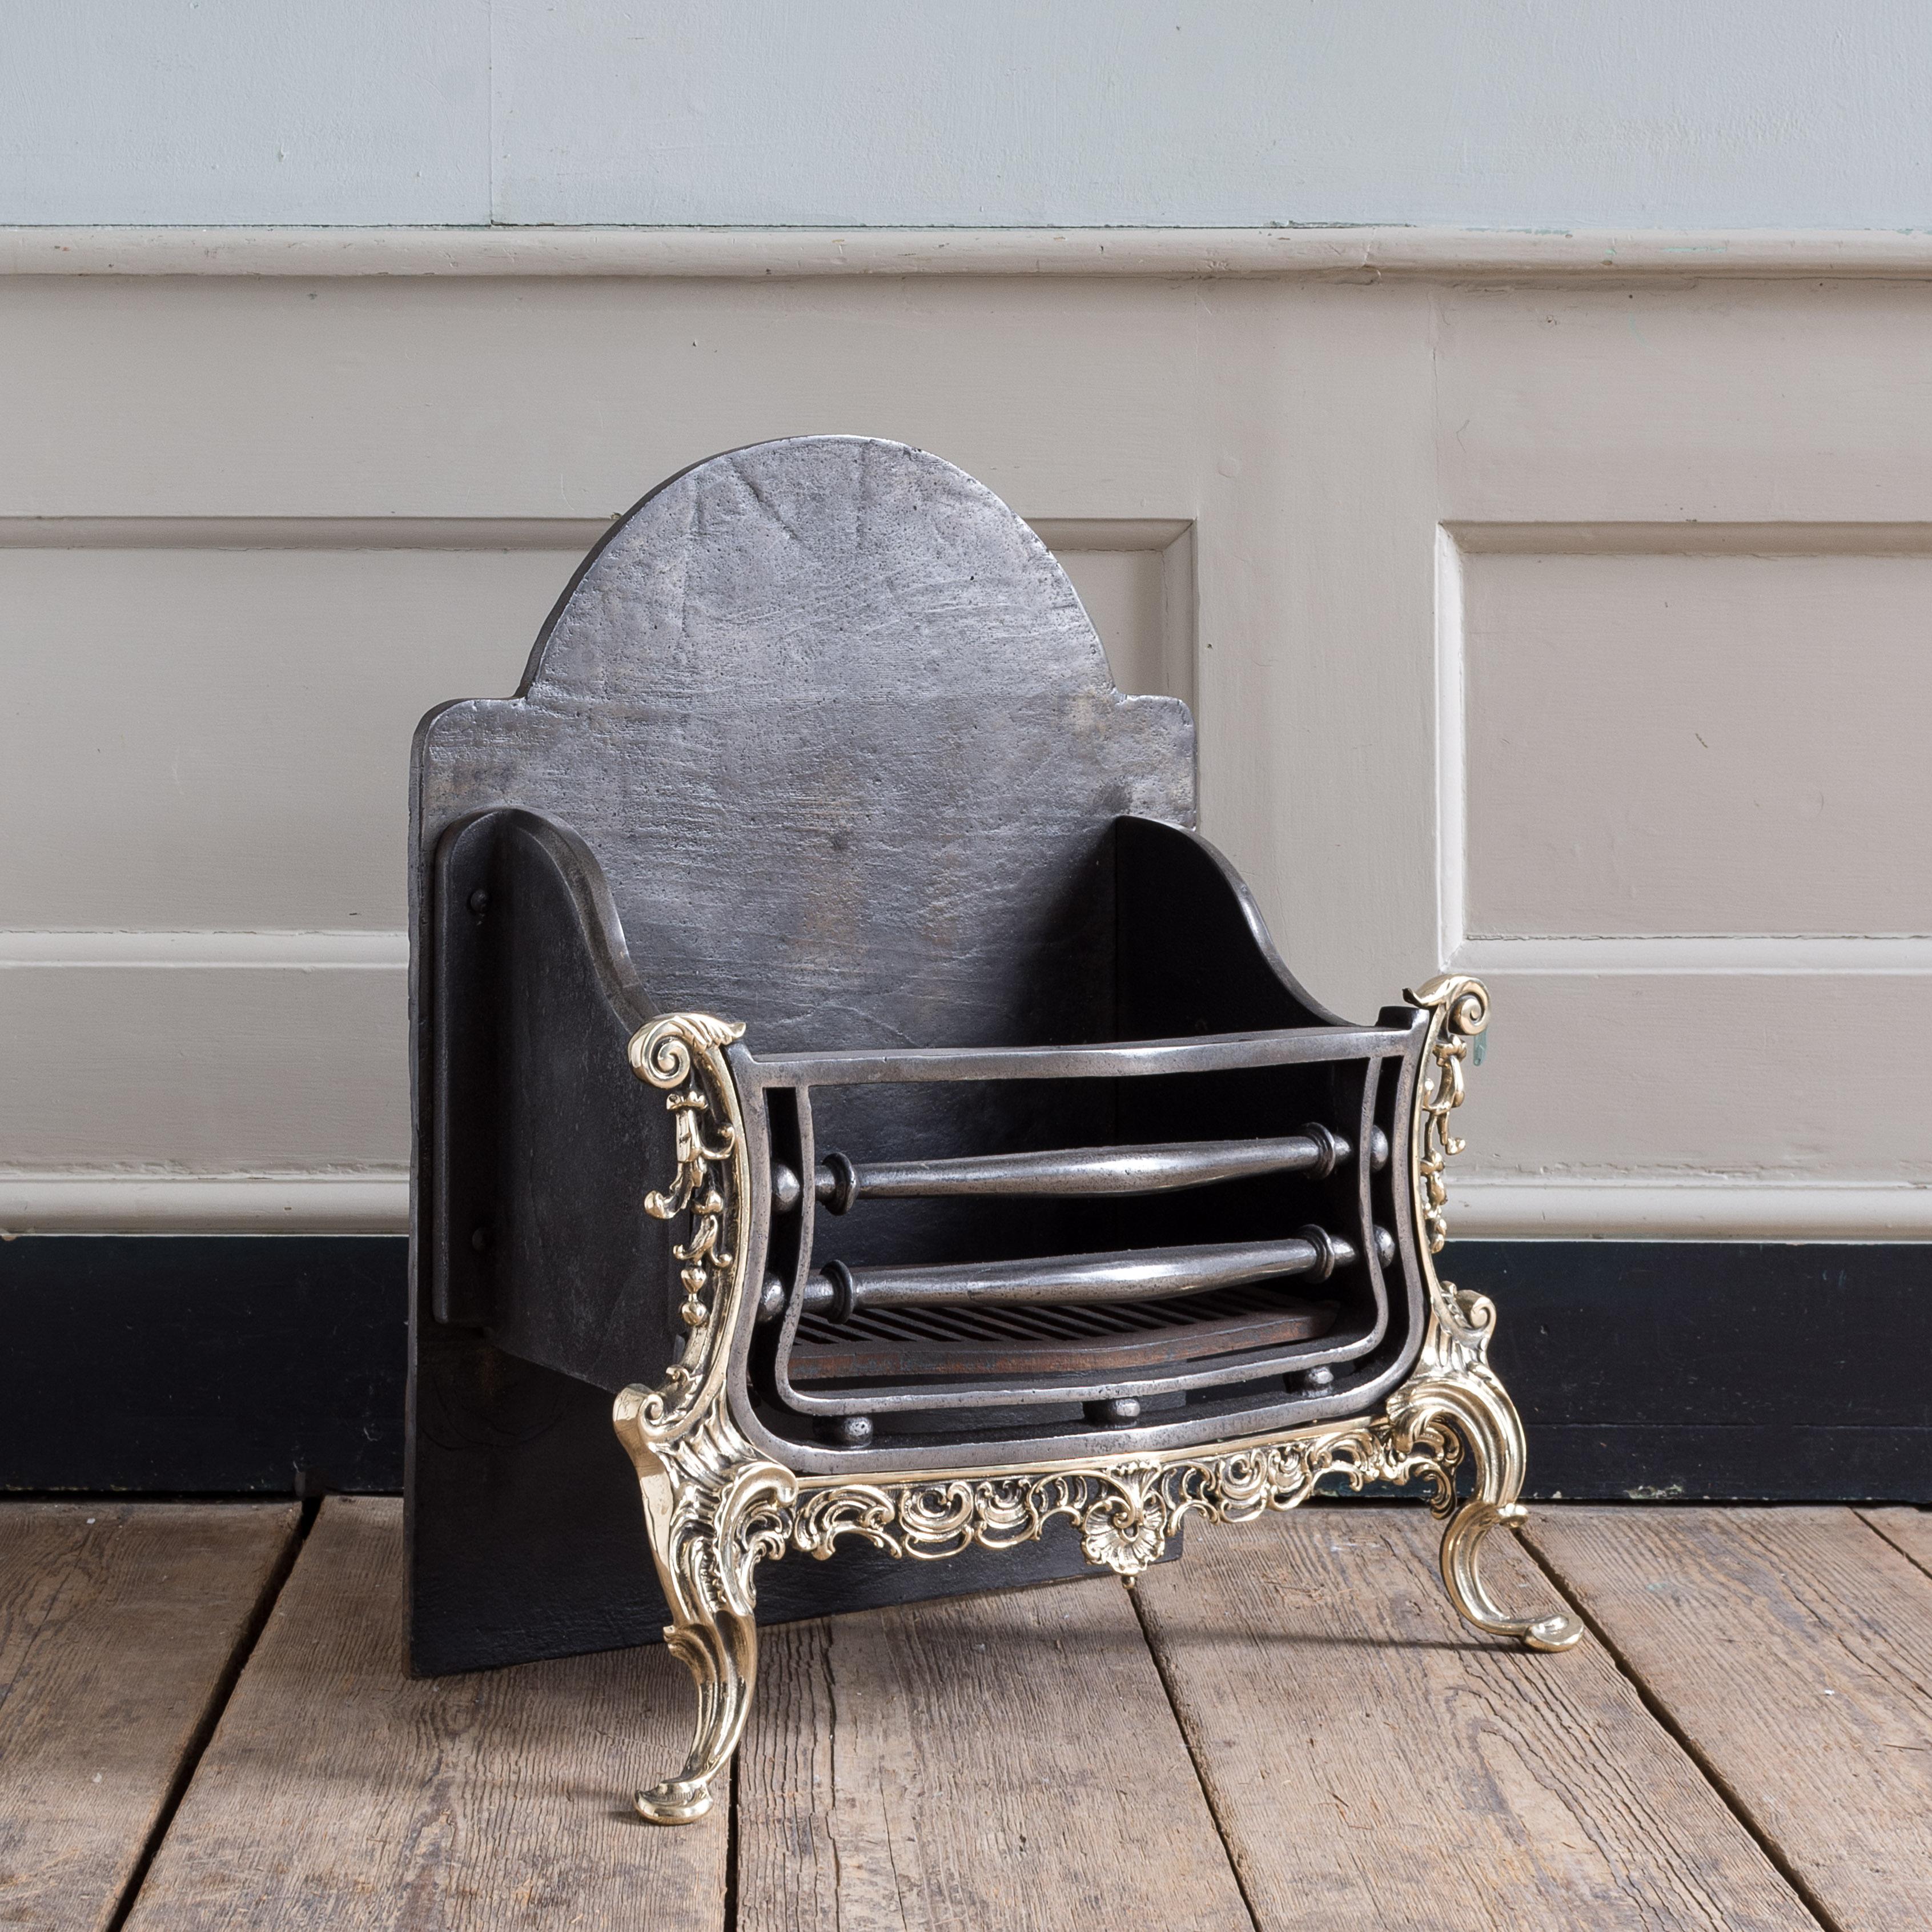 Nineteenth century iron and brass fire grate, with arched back-plate and rococo apron centred by shell motif, on elegant foliate scroll legs.

Restored, re-polished and ready to use immediately.